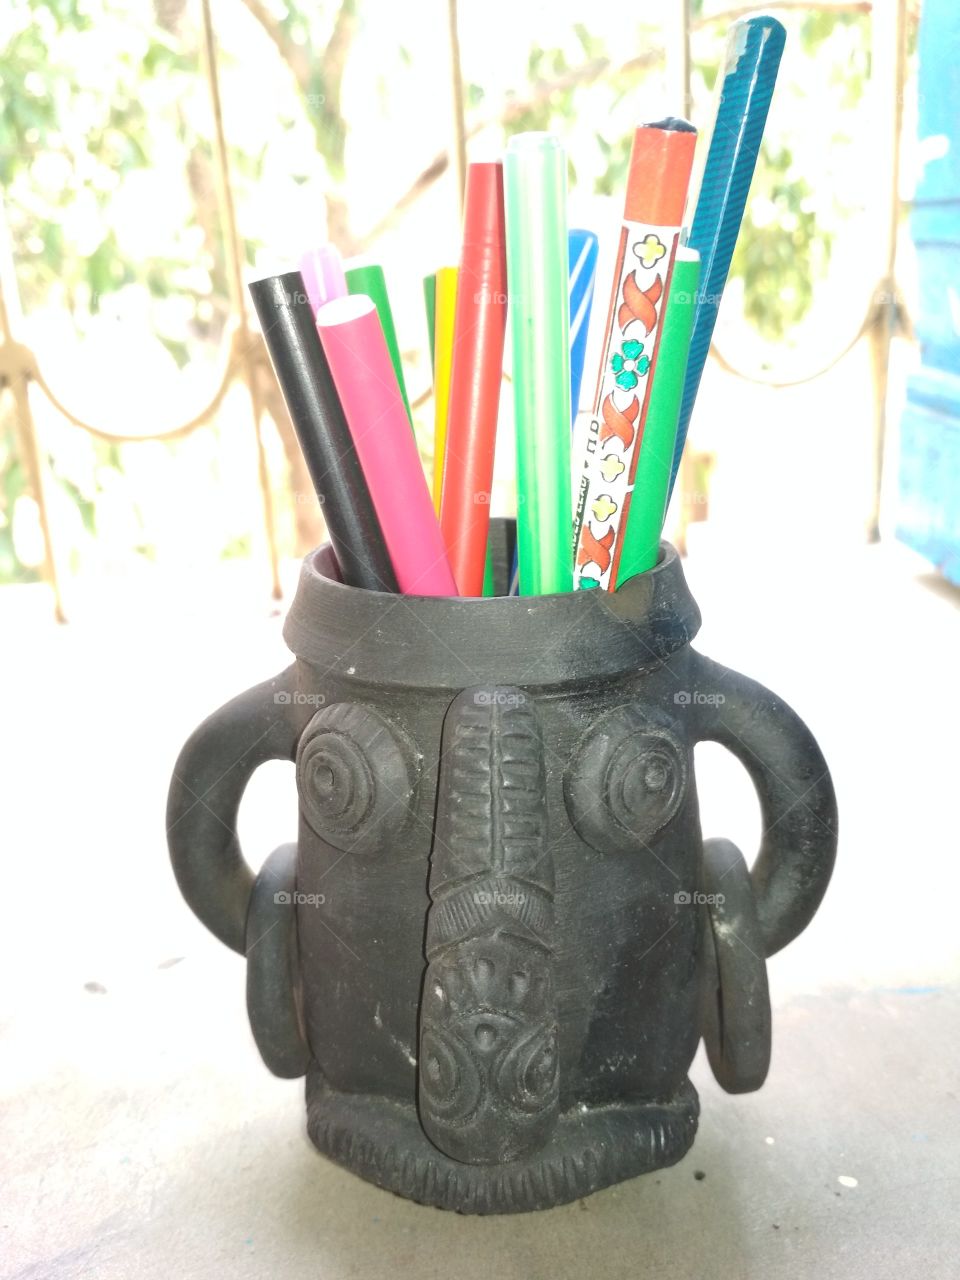 see this with pens....it has many beautiful colour but I think black is made this cup very beautiful...